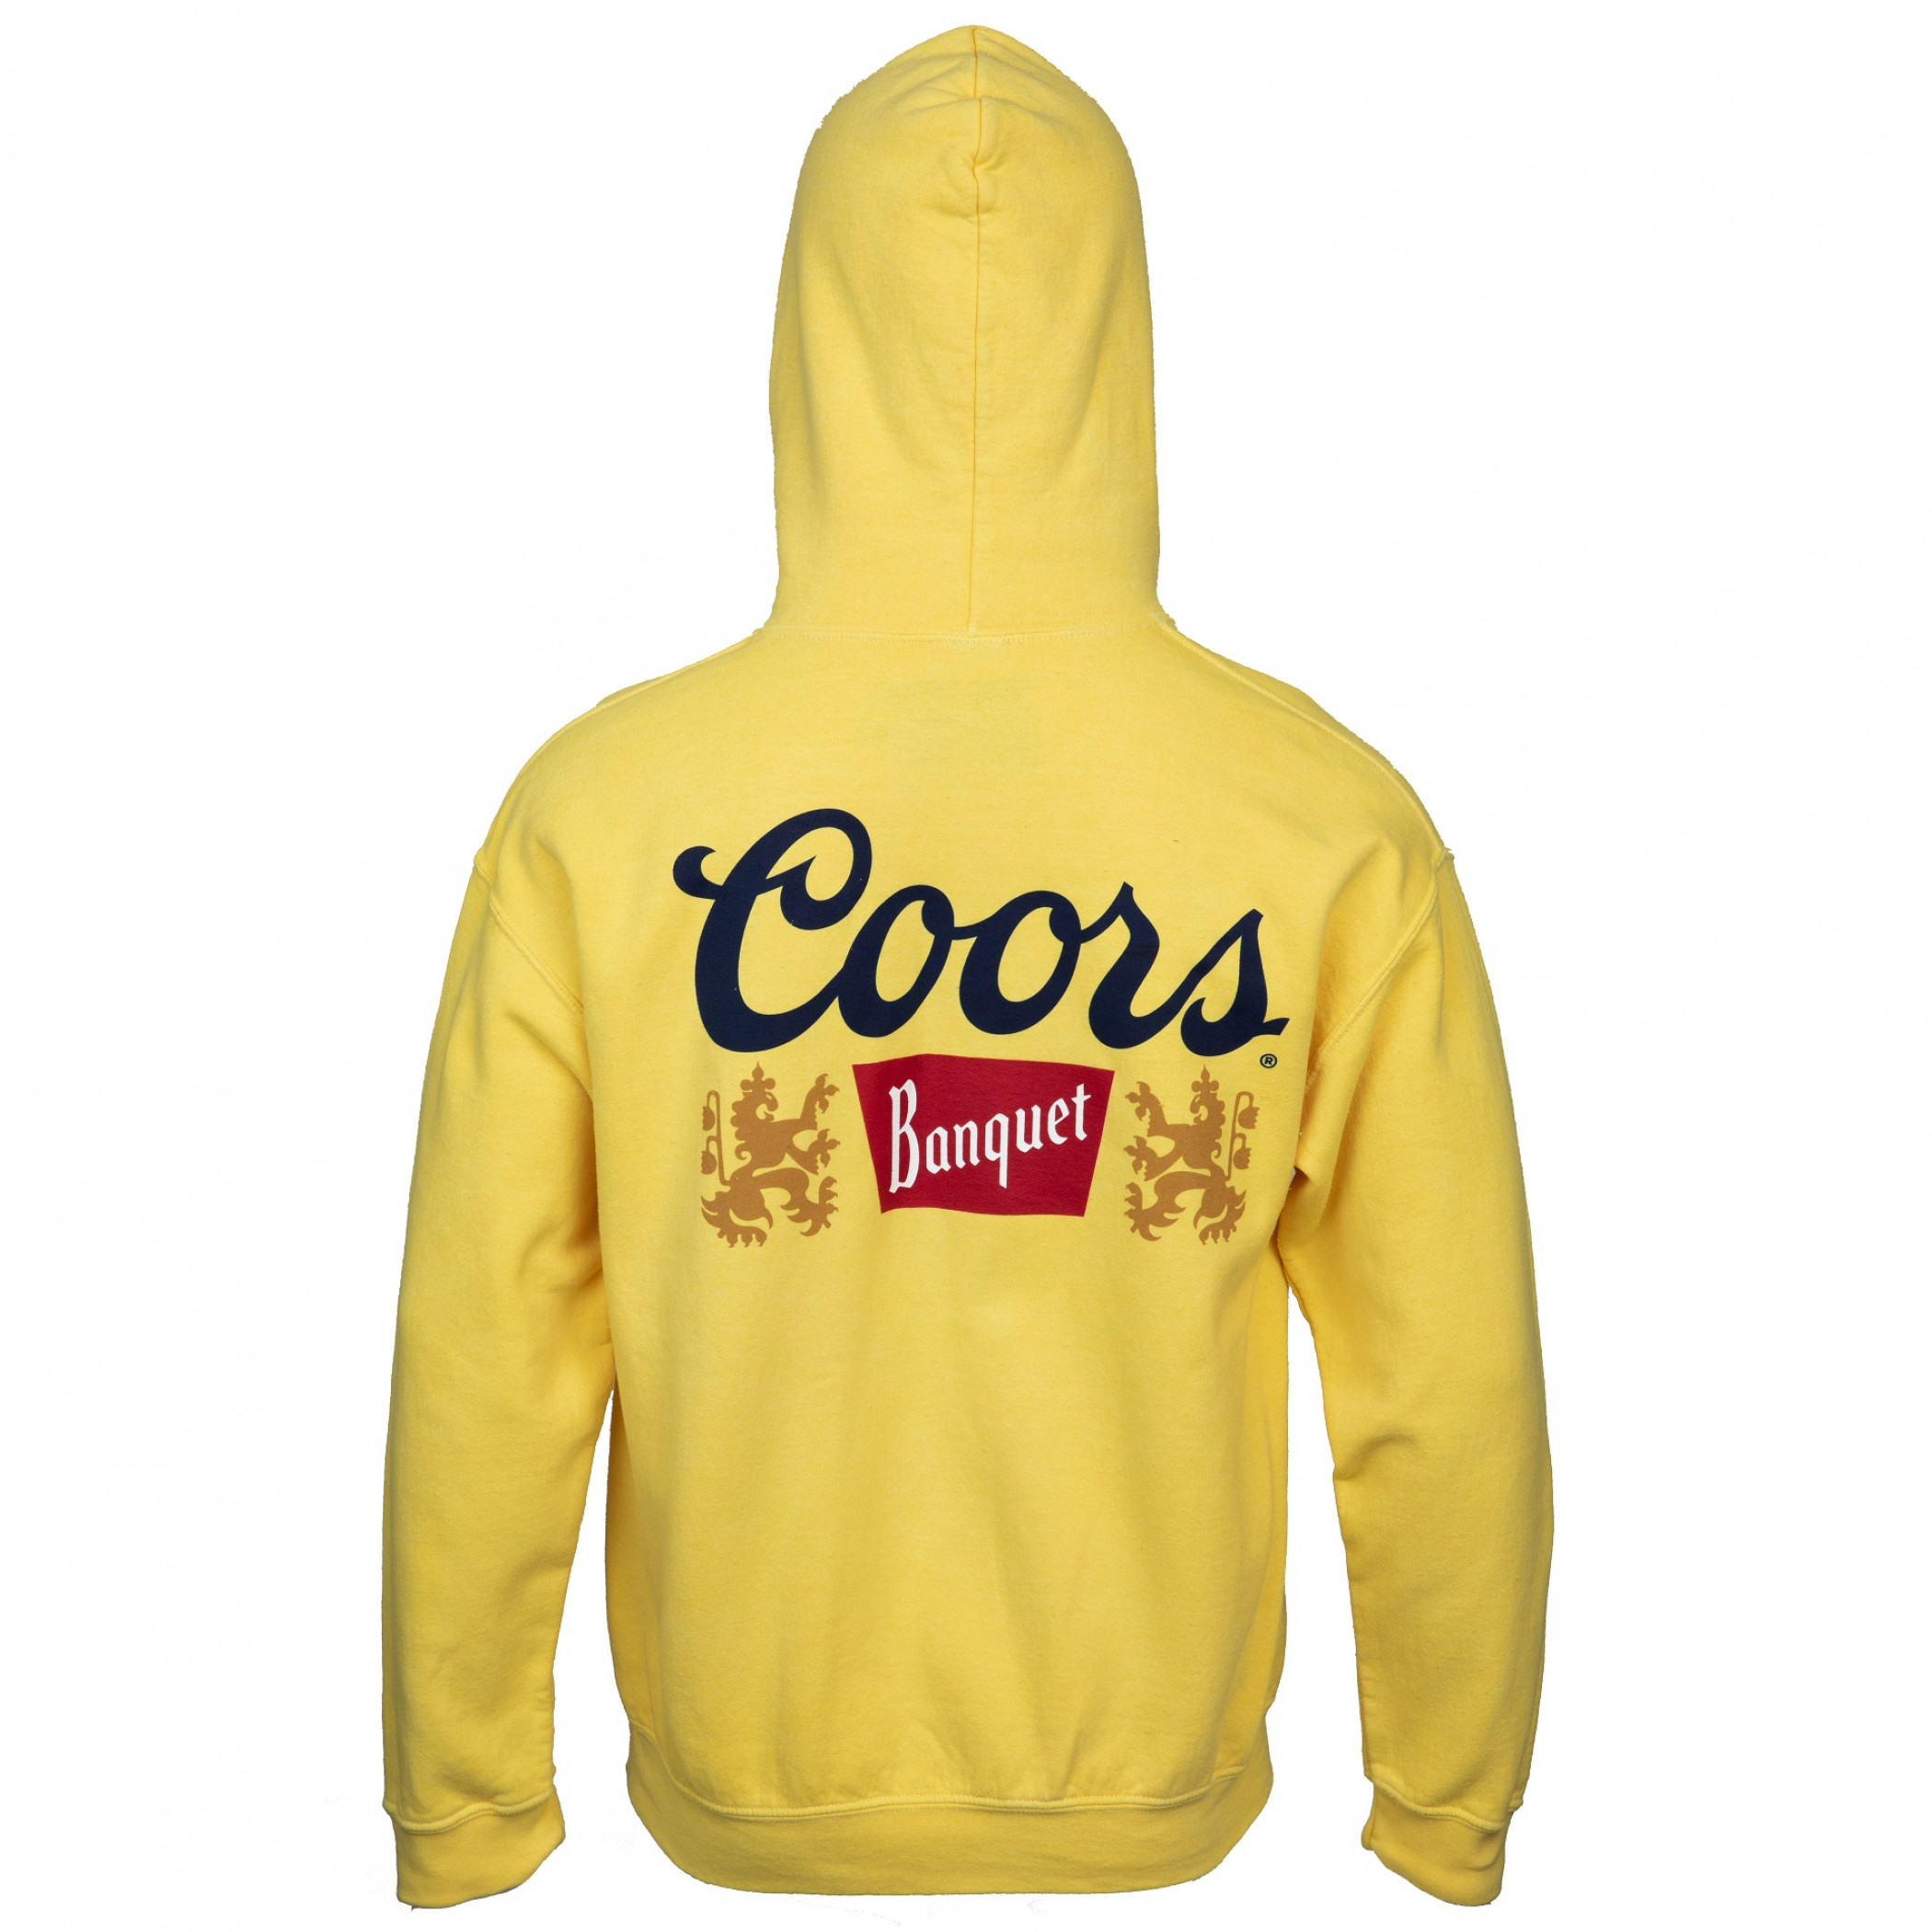 Coors Banquet Front and Back Print Gold Hoodie